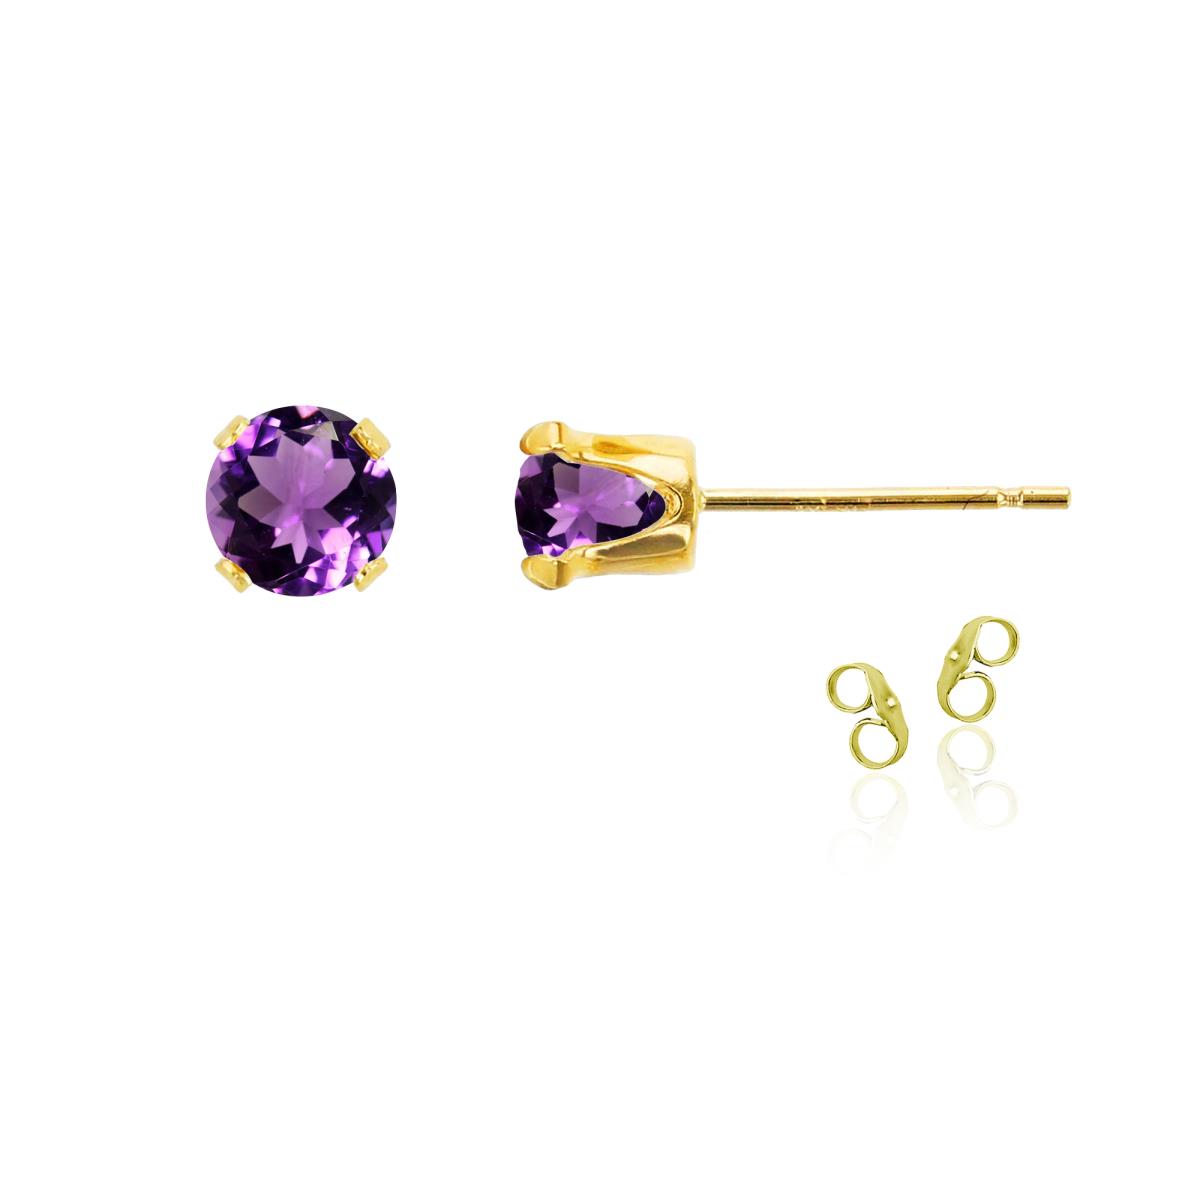 Sterling Silver Yellow 5mm Round Amethyst Stud Earring with Clutch